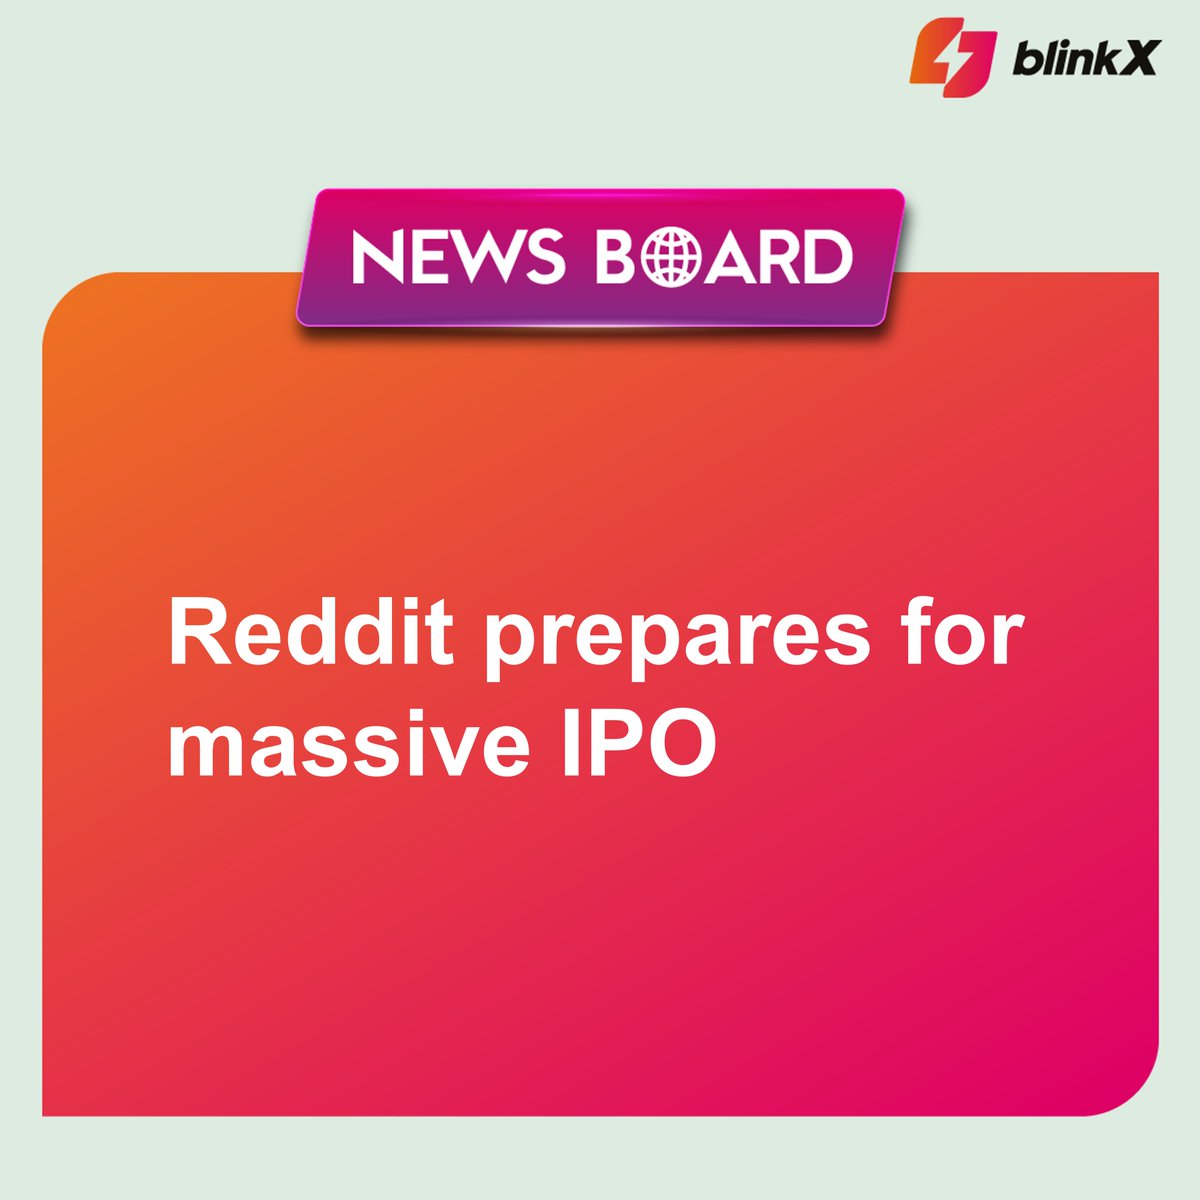 Reddit unveils IPO plans, aiming to raise up to $748 million. Offering shares to users & moderators reflects community-driven ethos. 

#RedditIPO #CommunityShares #Technology #IPOAlert #NASDAQ  #DowJones  #stockmarket #investing #trading #finance #research #MadeForTheMarket